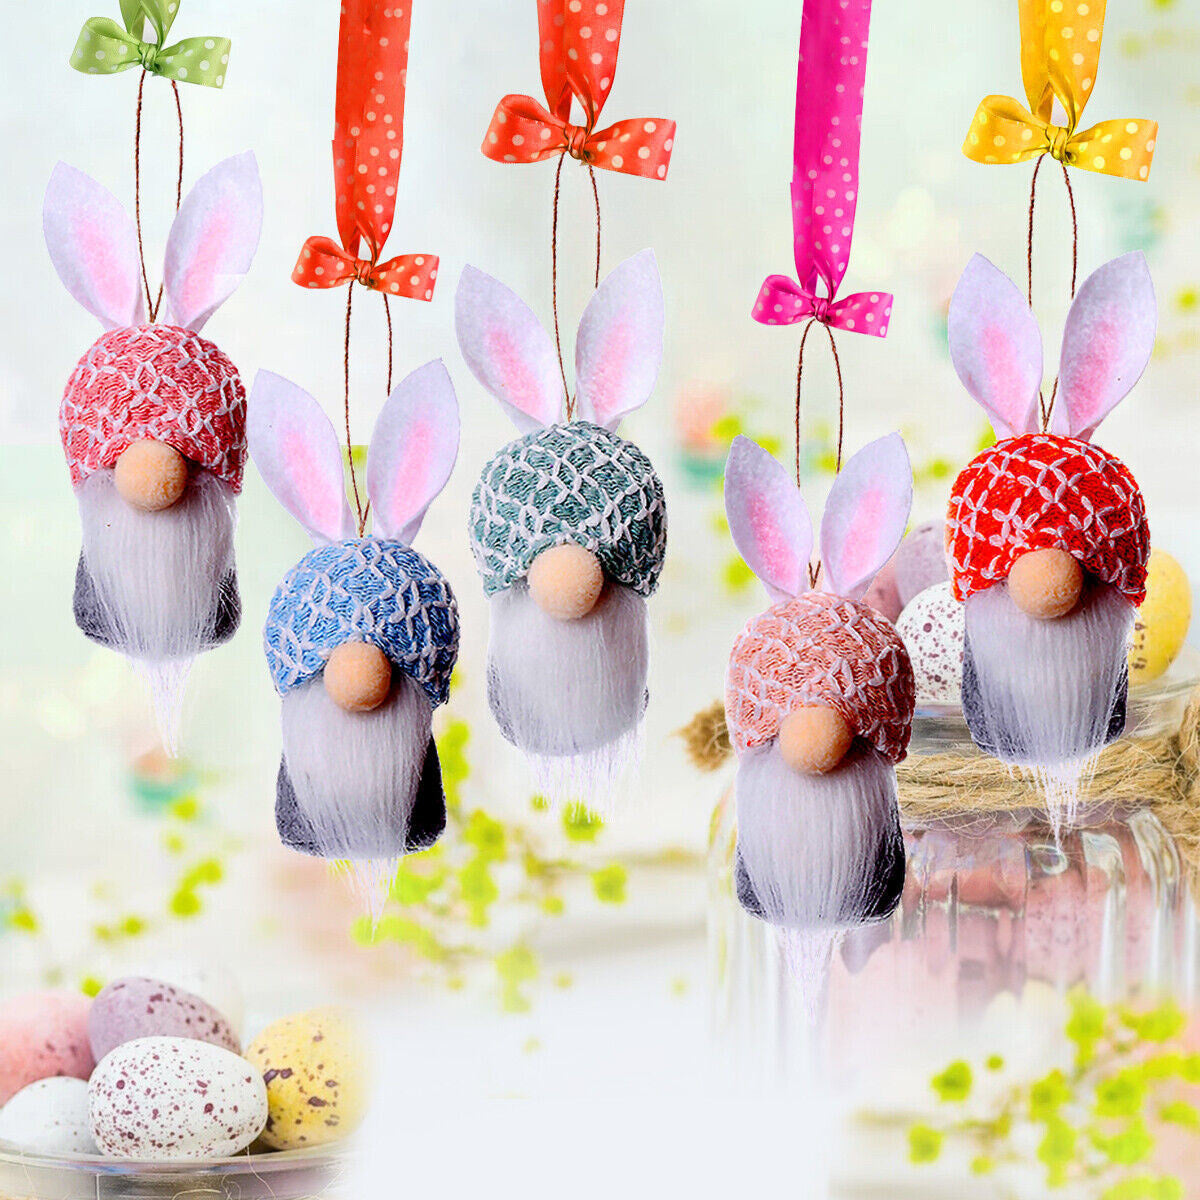 10Pcs Easter Hanging Bunny Gnomes Colorful Spring Bunny Plush Gnomes for Gifts